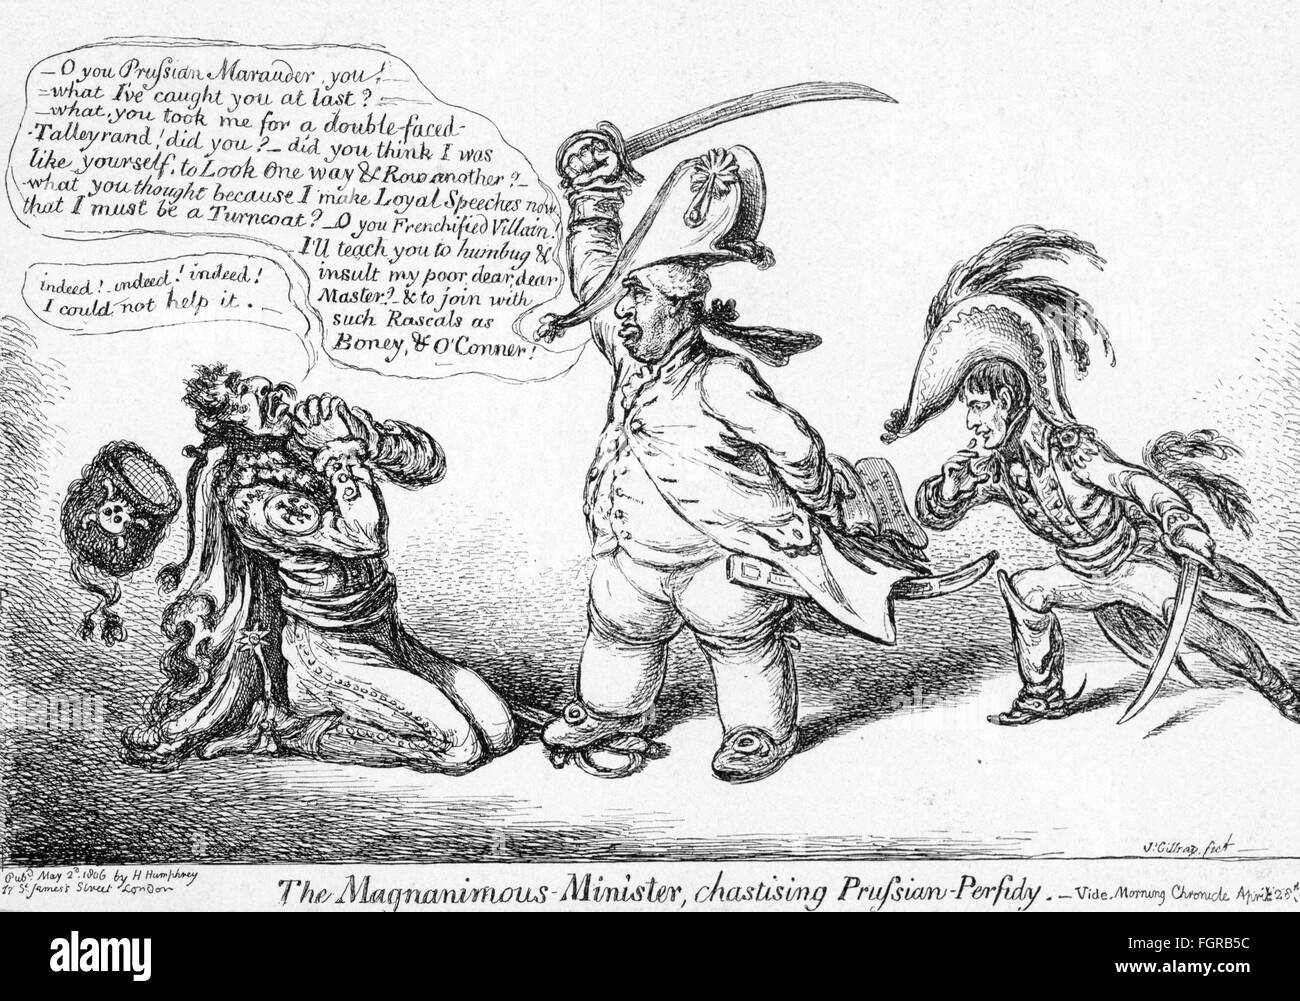 politics,treaties,treaty of Paris,15.2.1806,caricature,the British foreign minister Charles James Fox is insulting King Frederick William III because of his cooperation with Emperor Napoleon I,drawing by James Gillray,2.5.1806,Bonaparte,House of Hohenzollern,Napoleonic Wars,Great Britain,France,Kingdom of Prussia,satire,foreign policy,external policy,people,men,man,male,19th century,politics,policy,treaty,treaties,caricature,caricatures,foreign minister,Foreign Secretary,Secretary of State,insult,insulting,co-operation,internat,Additional-Rights-Clearences-Not Available Stock Photo